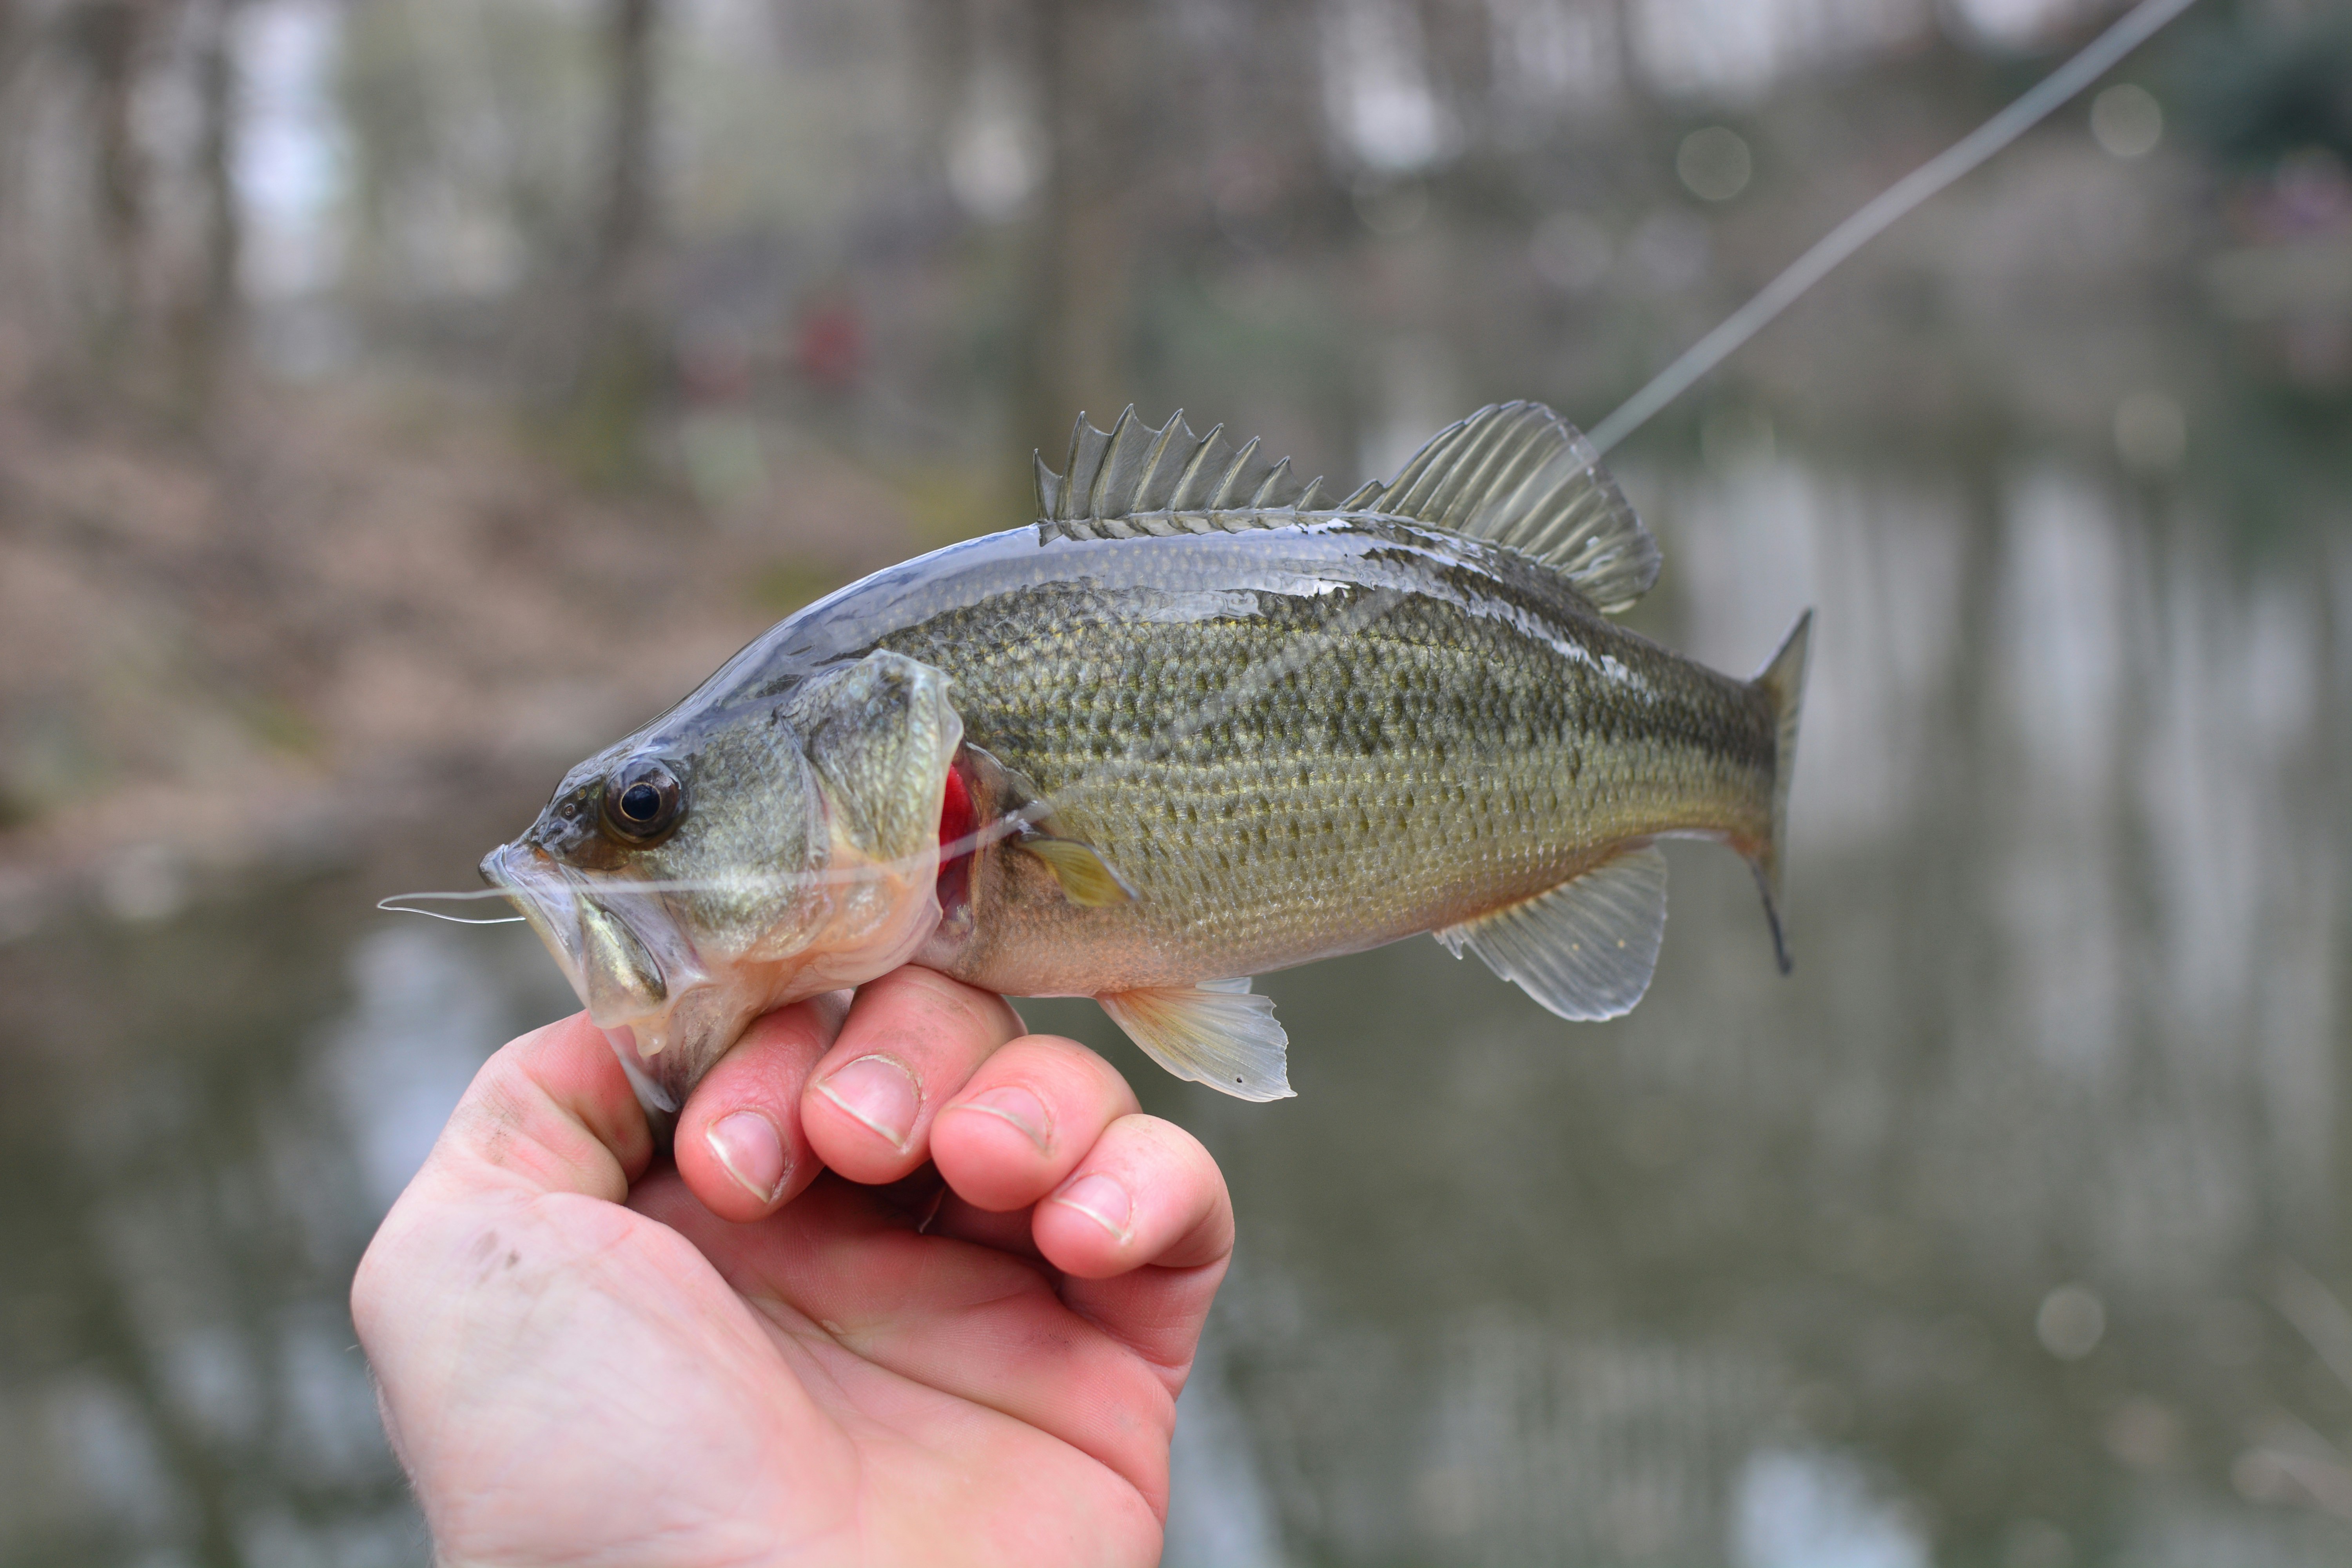 Small bass held by mouth with fishing line showing.